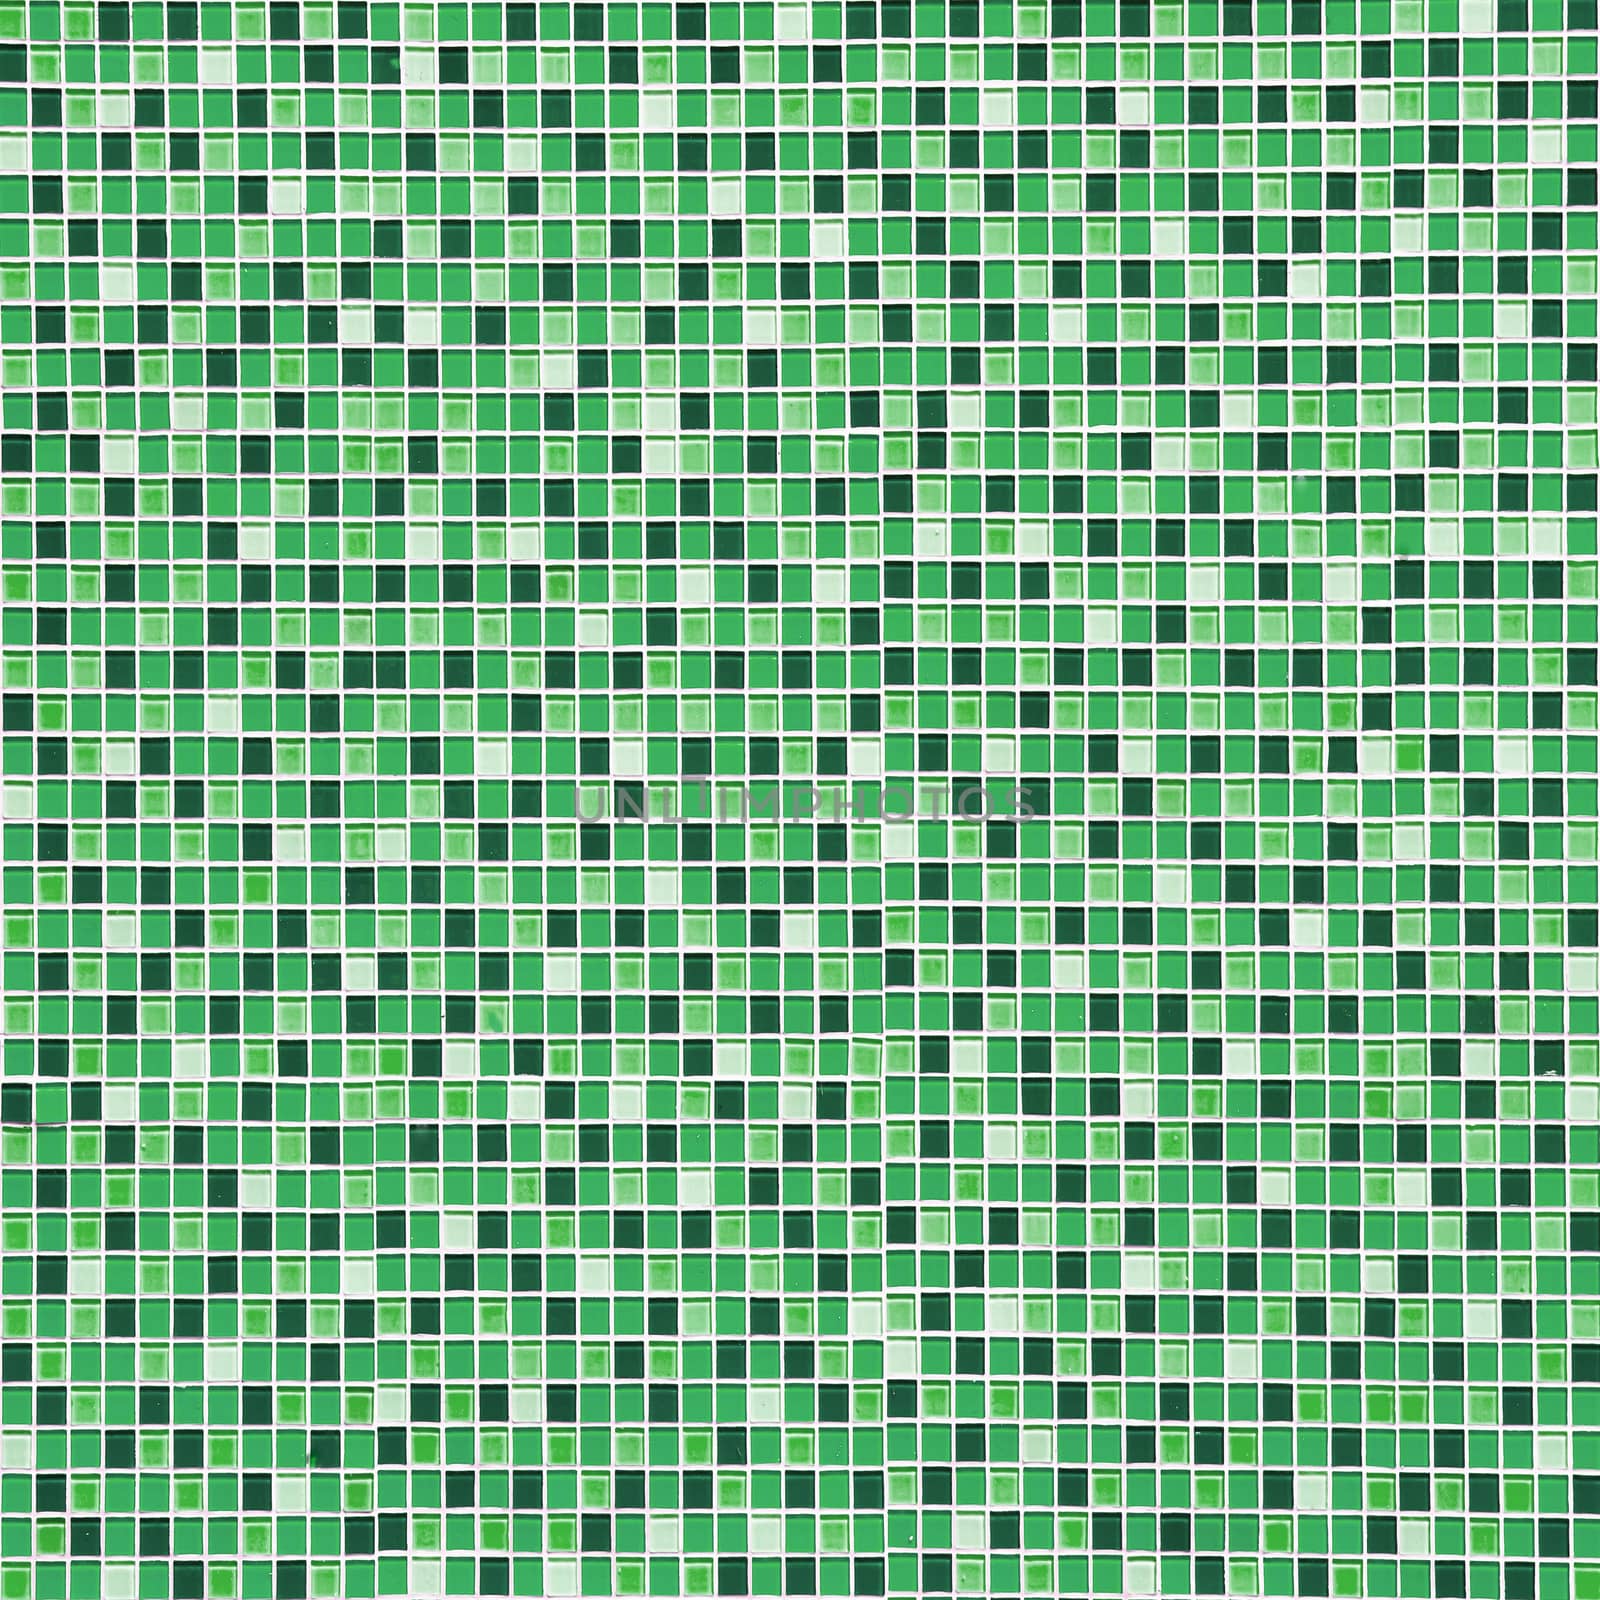 Mosaic tile for background